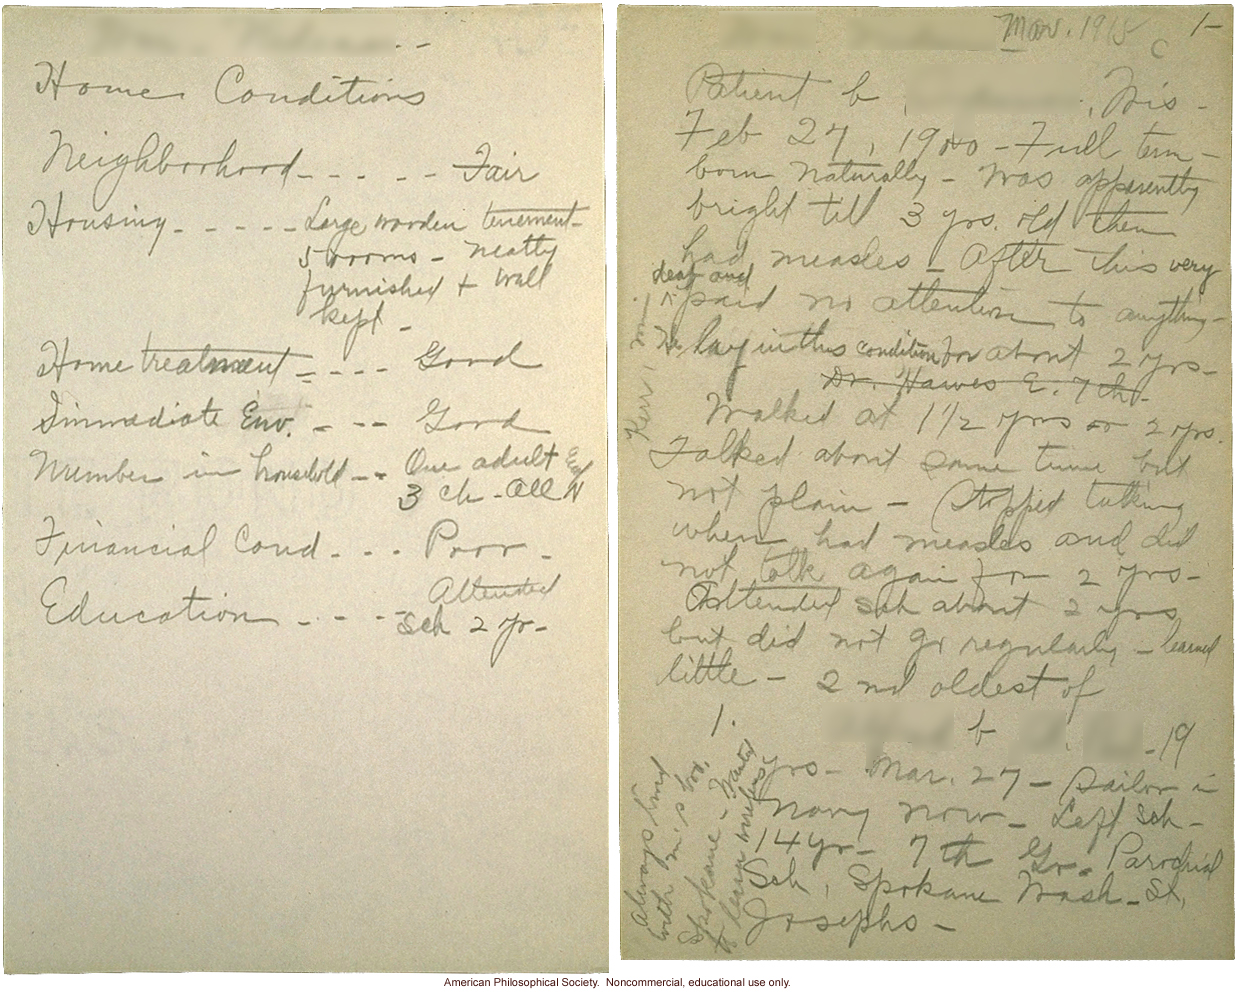 &quote;Data collected by Miss Devitt, May and Nov. 1915,&quote; Eugenics Records Office fieldworker